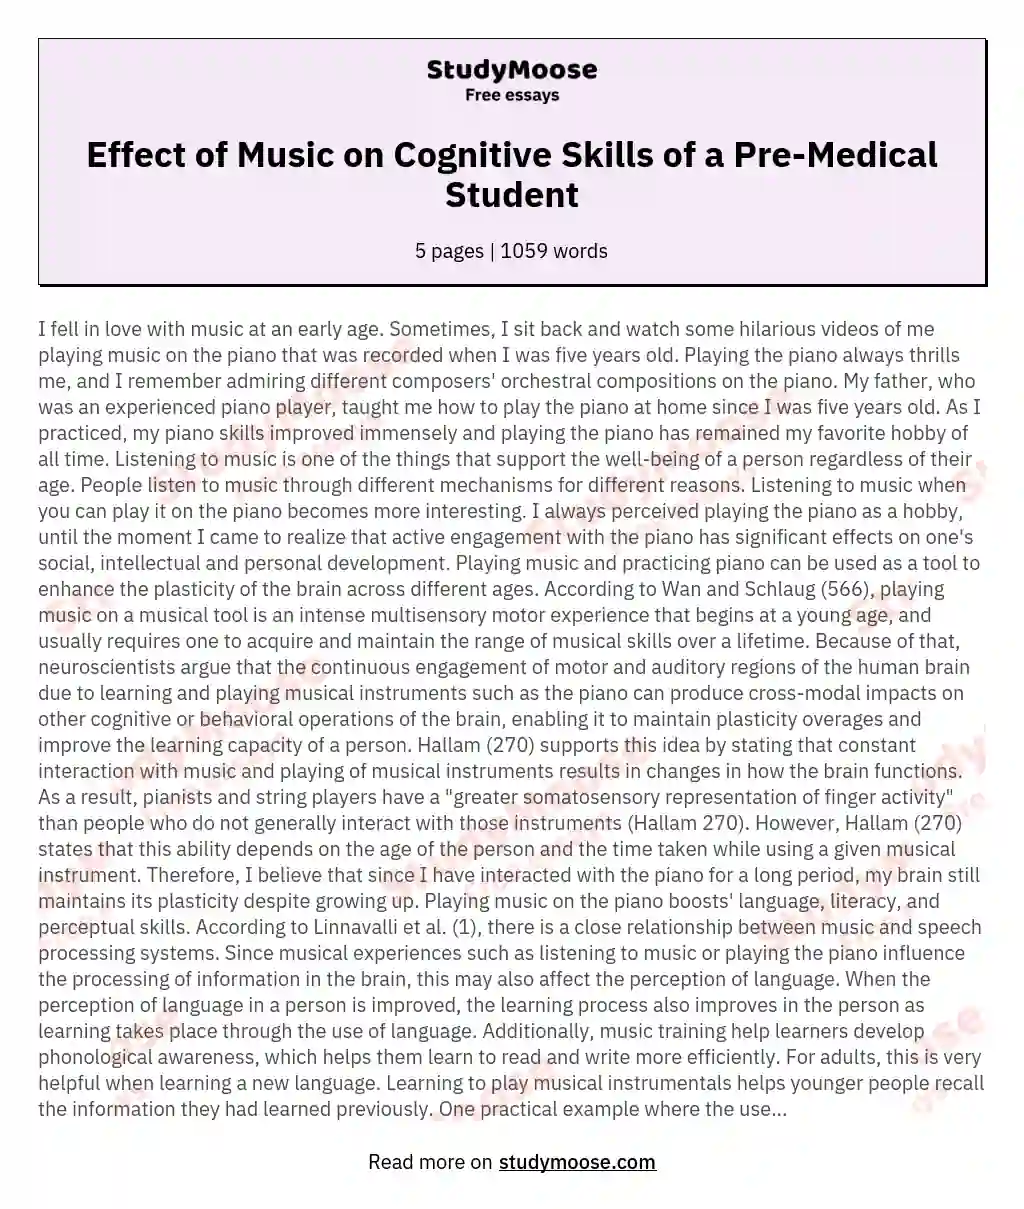 Effect of Music on Cognitive Skills of a Pre-Medical Student essay